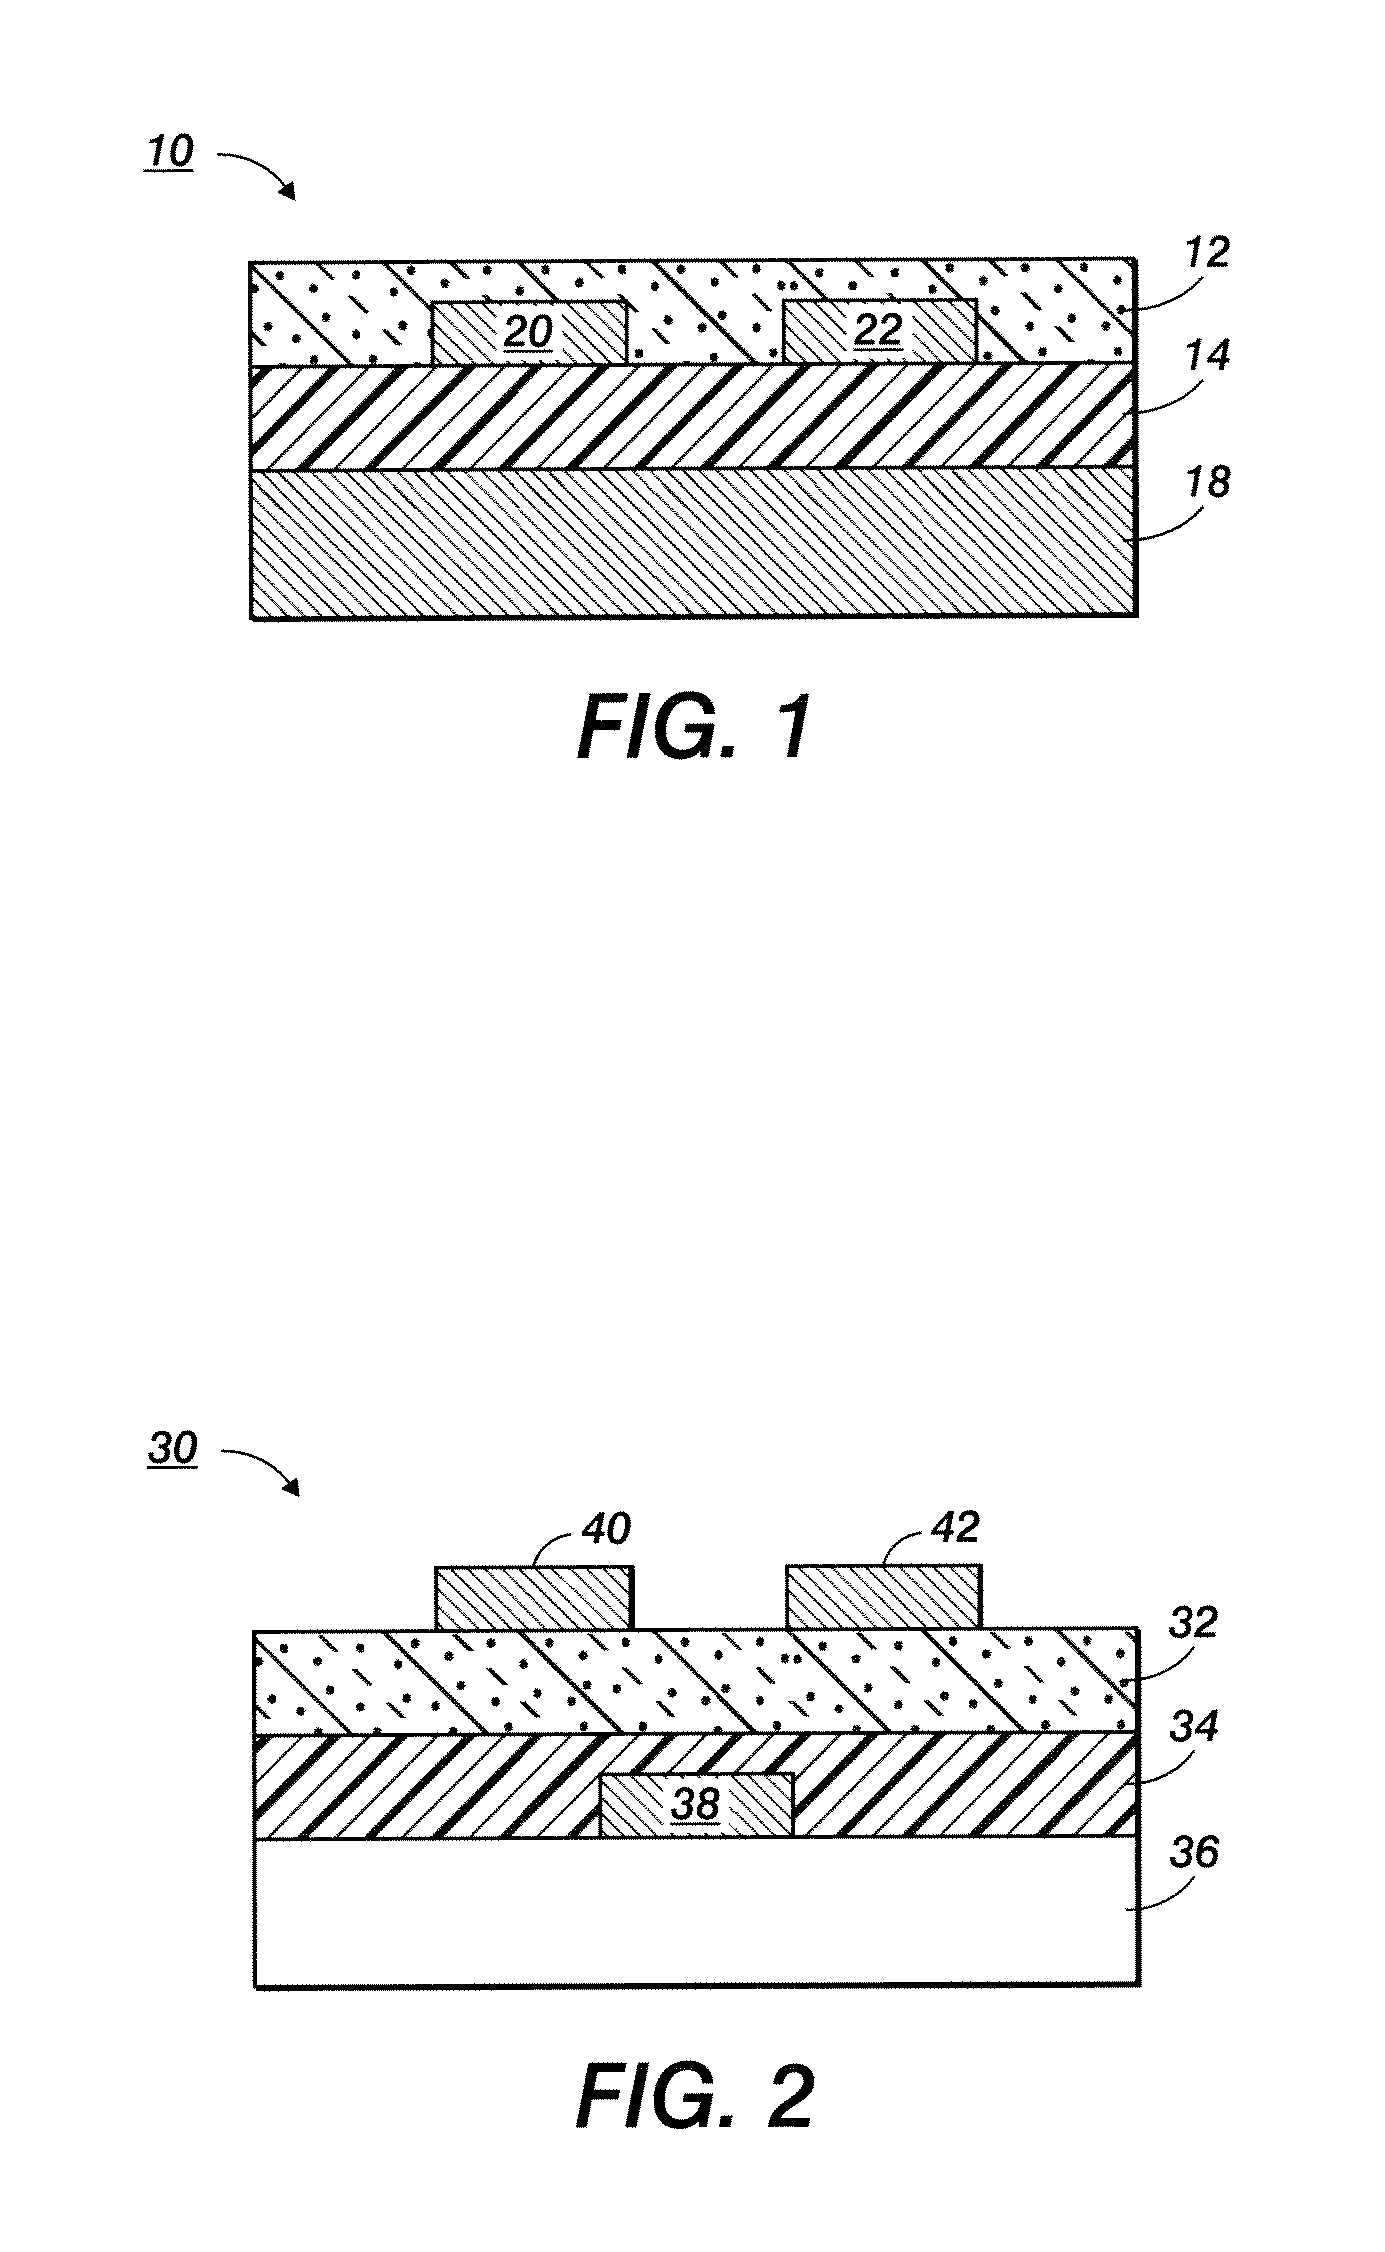 Methods for producing carboxylic acid stabilized silver nanoparticles